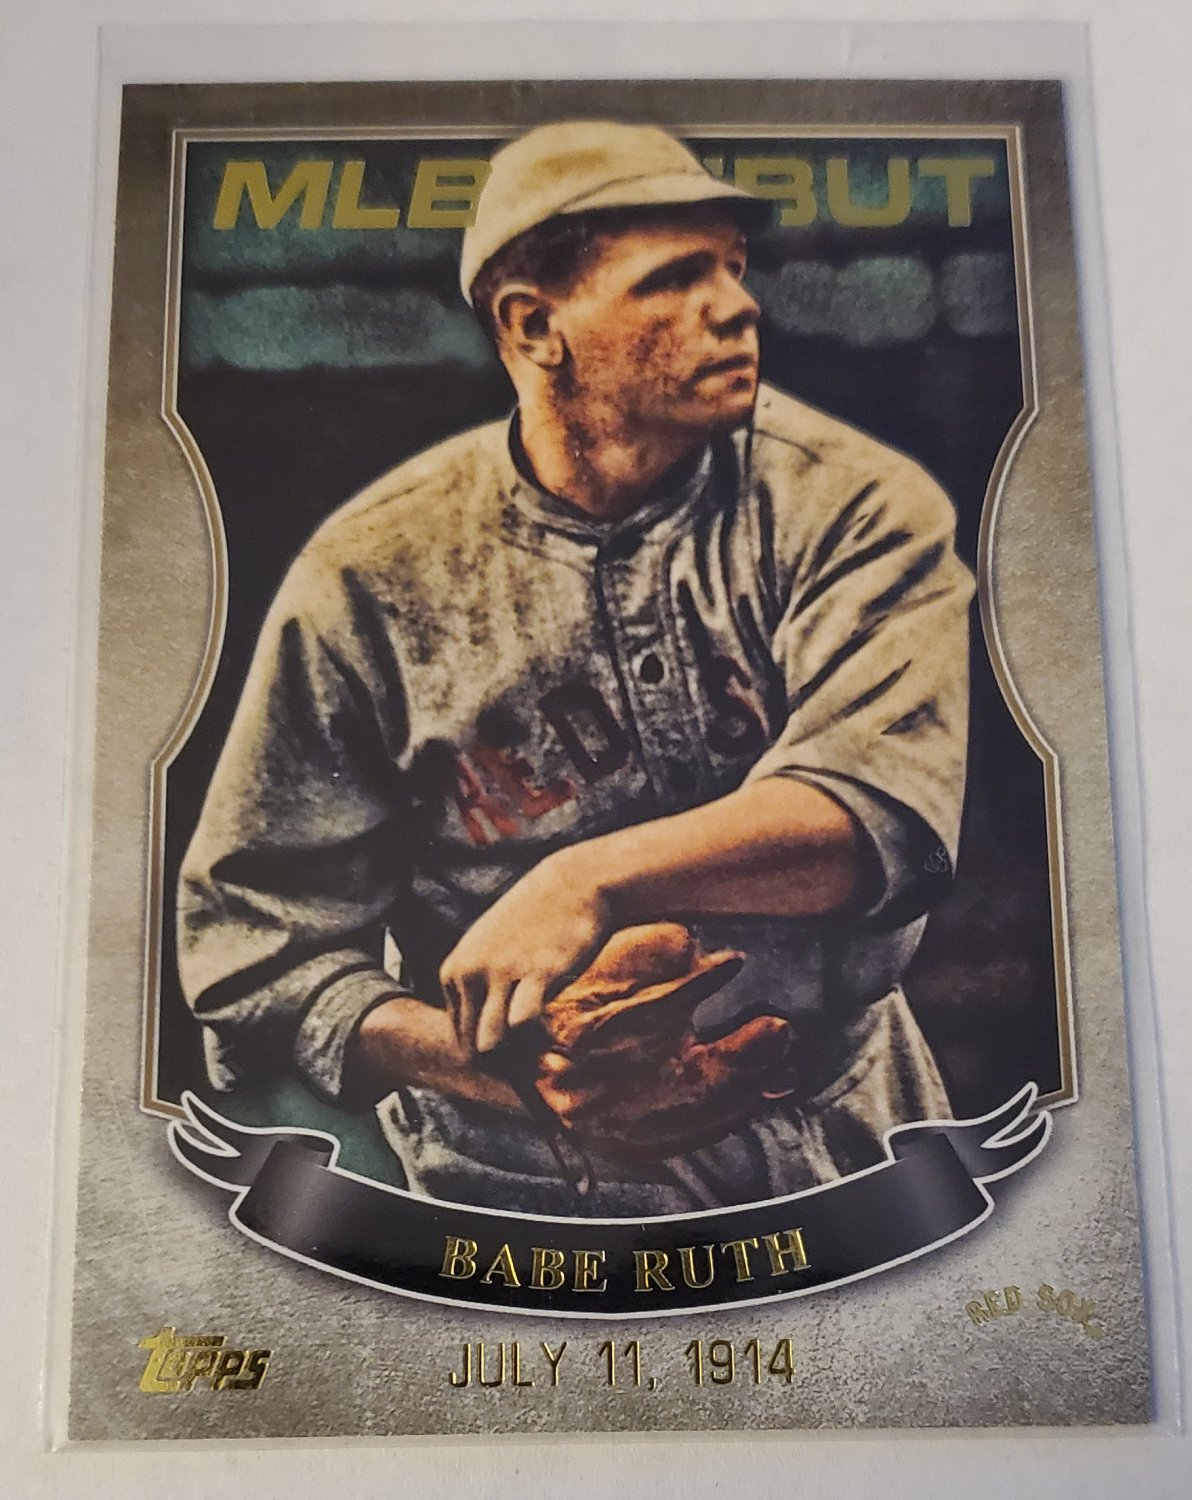 Babe Ruth 2016 Topps MLB Debut Gold Insert Card